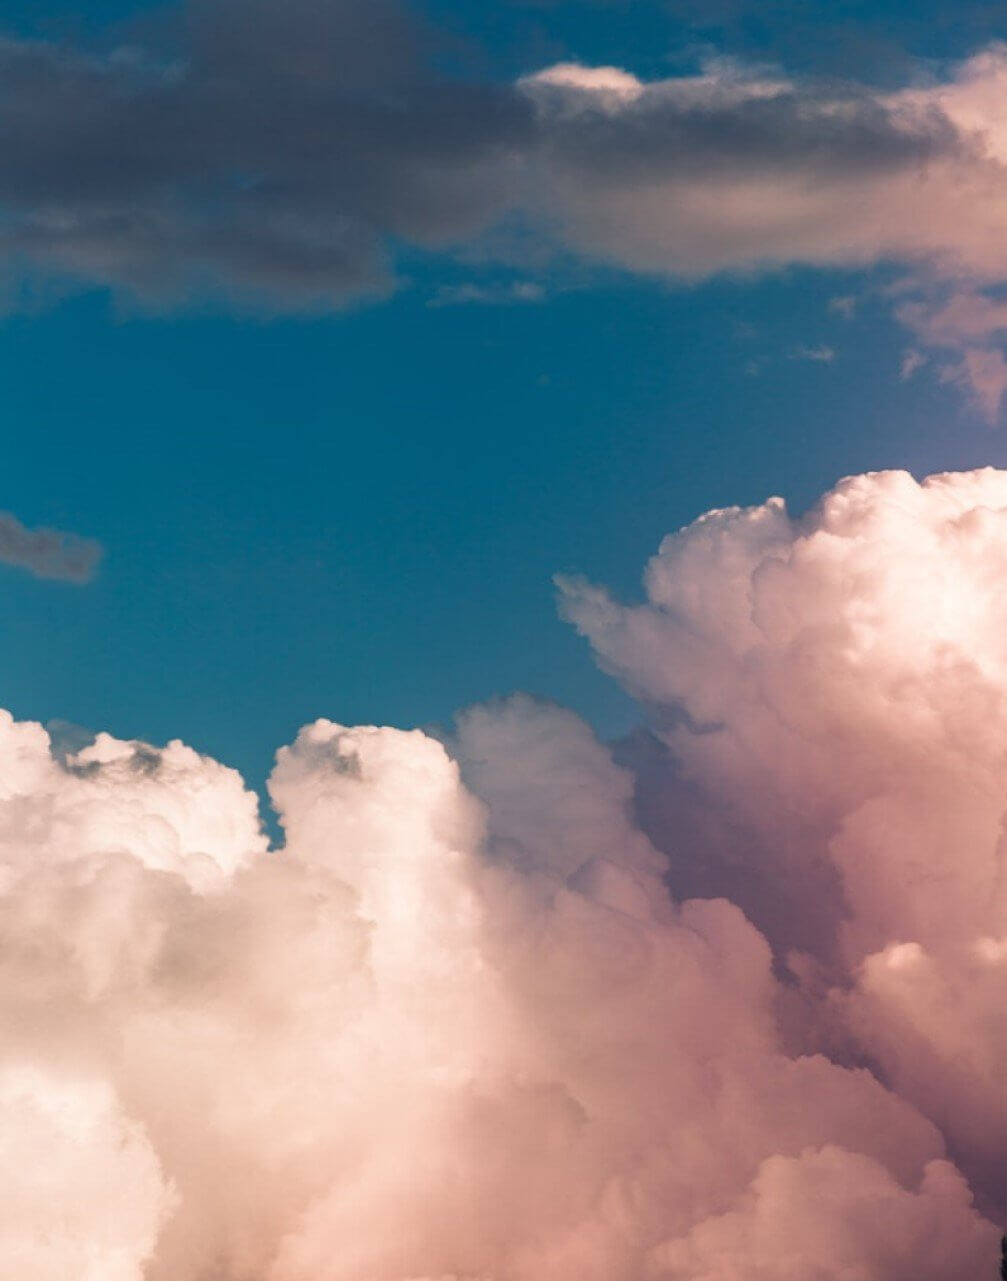 Breathtaking Cloud Aesthetic Wallpaper For iPhones (Free Download!)